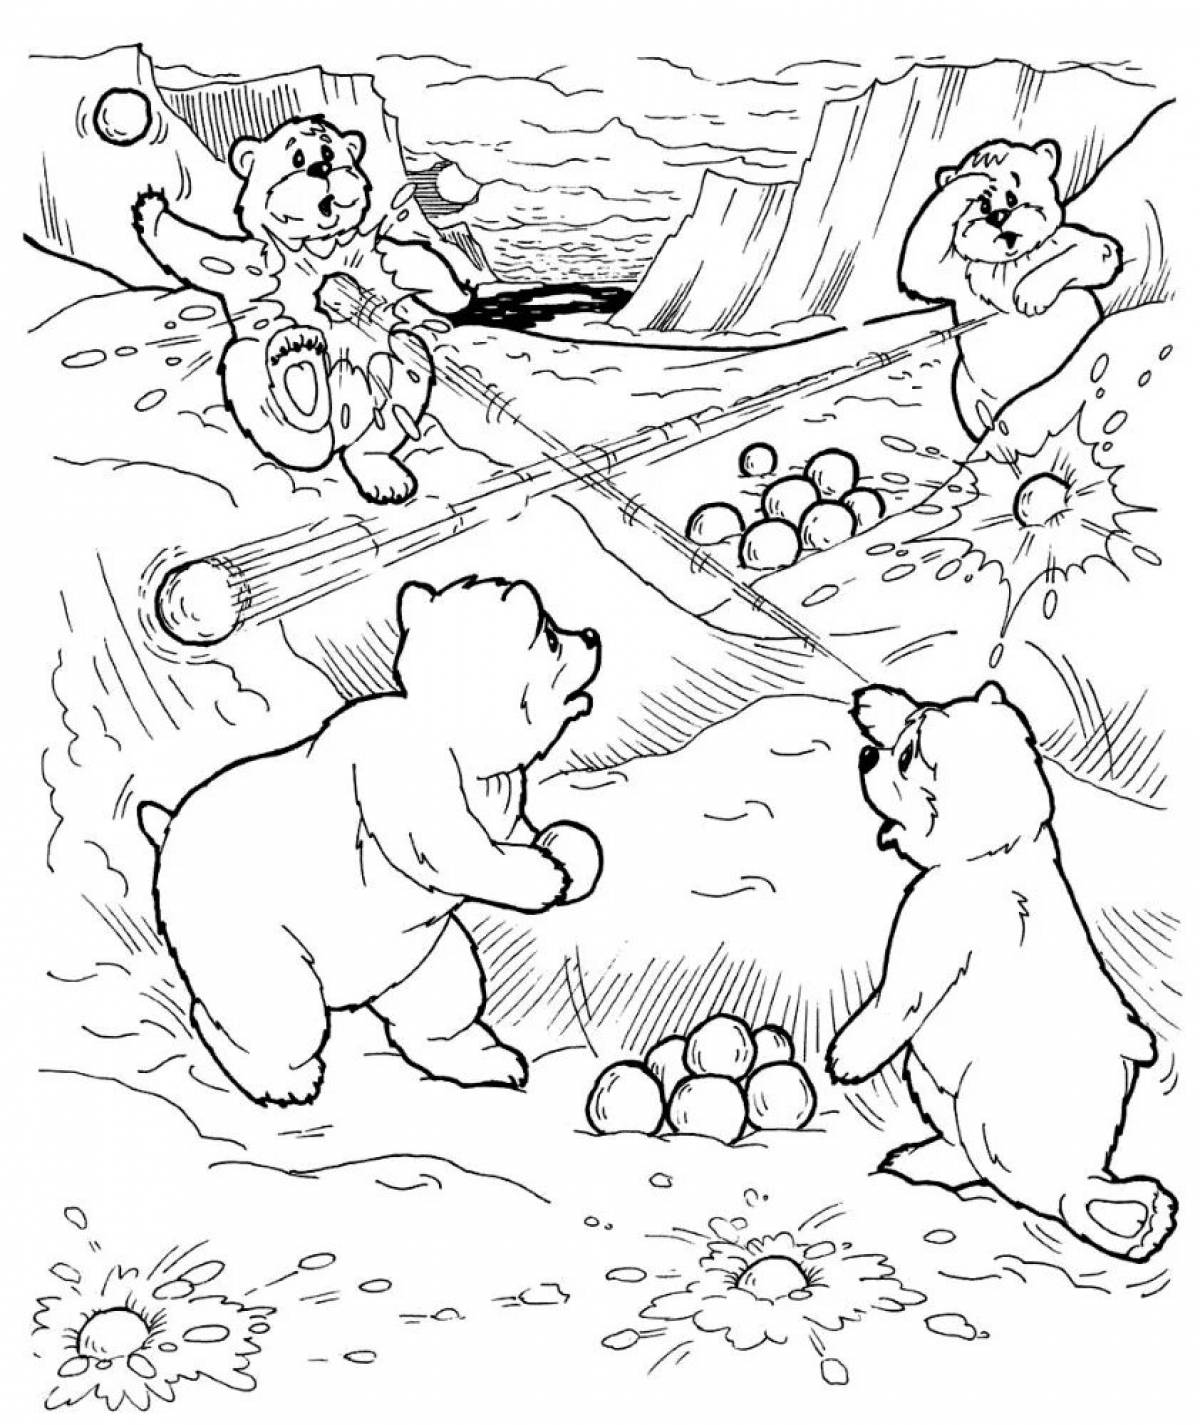 Blizzardy coloring page медведь зимой